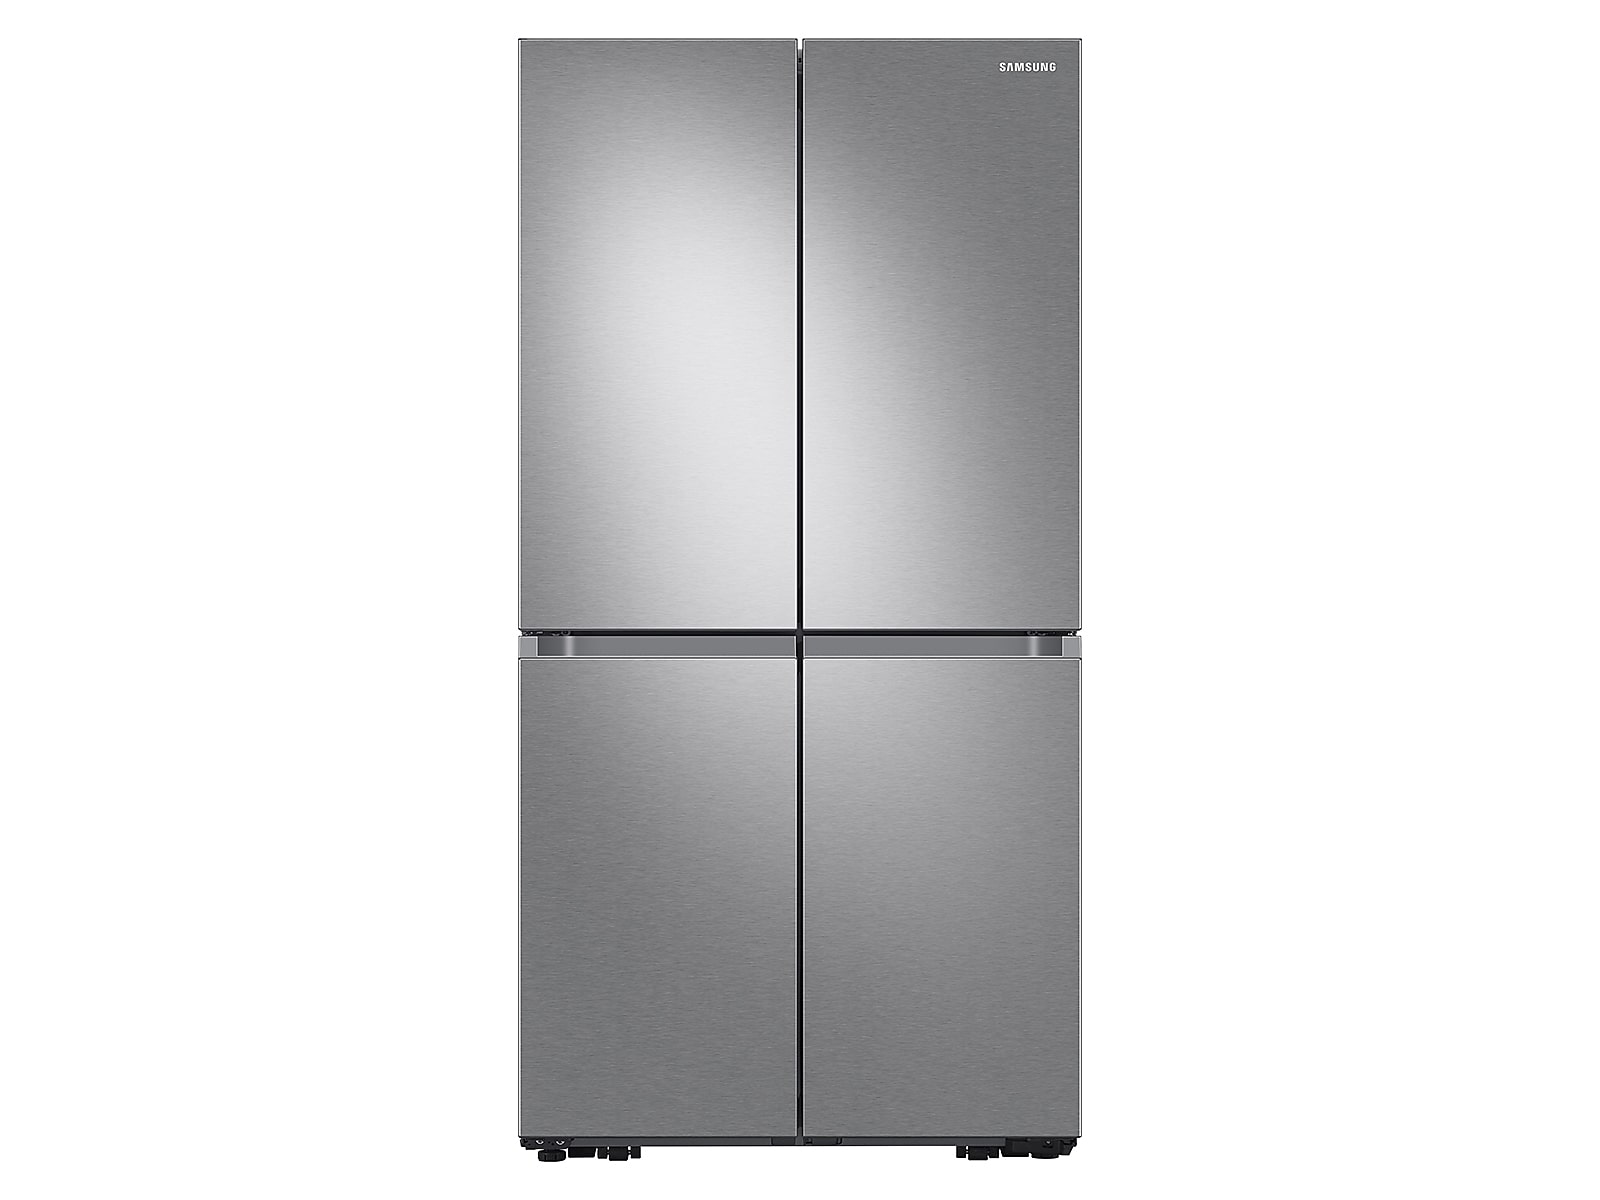 Samsung 29 cu. ft. Smart 4-Door Flex™ Refrigerator with AutoFill Water Pitcher and Dual Ice Maker in Stainless Steel(RF29A9071SR/AA) photo